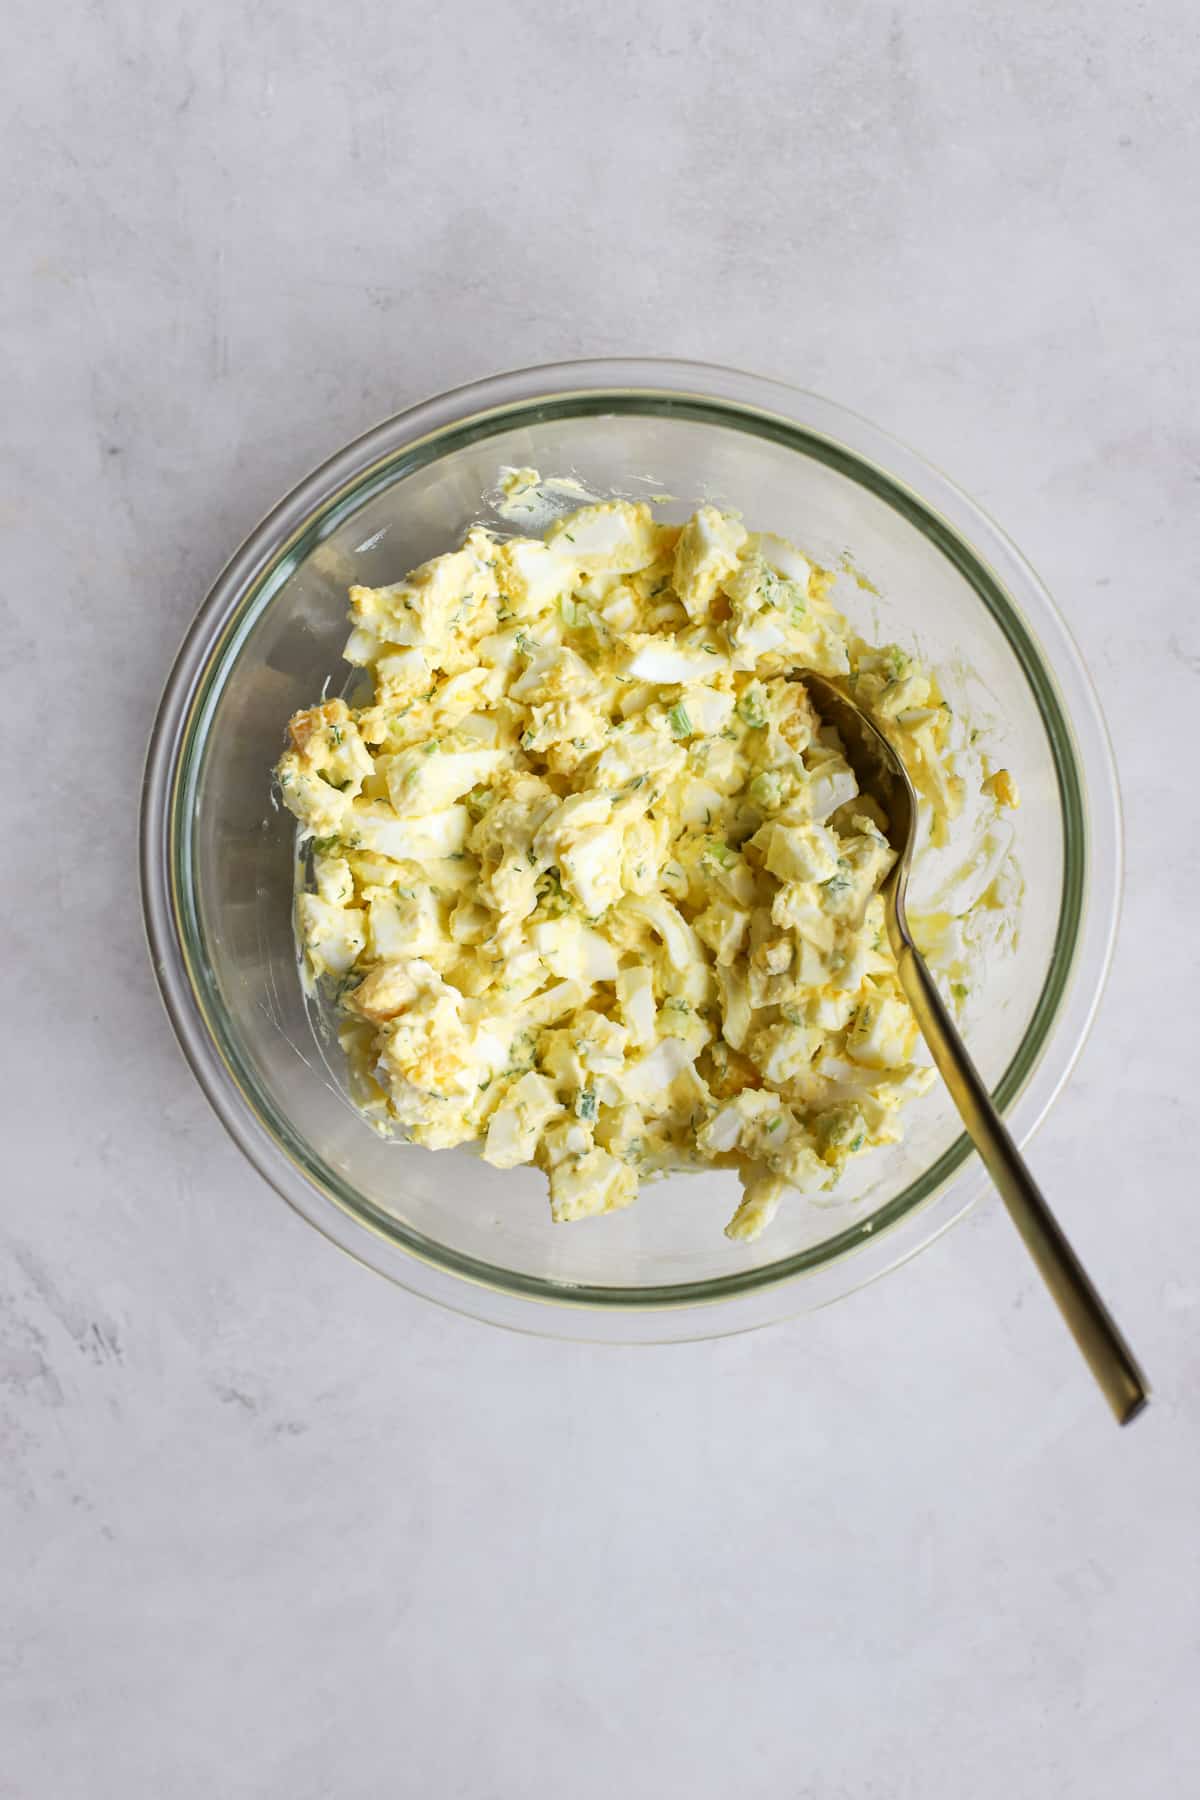 Healthy egg salad in clear glass bowl with spoon, on light gray surface